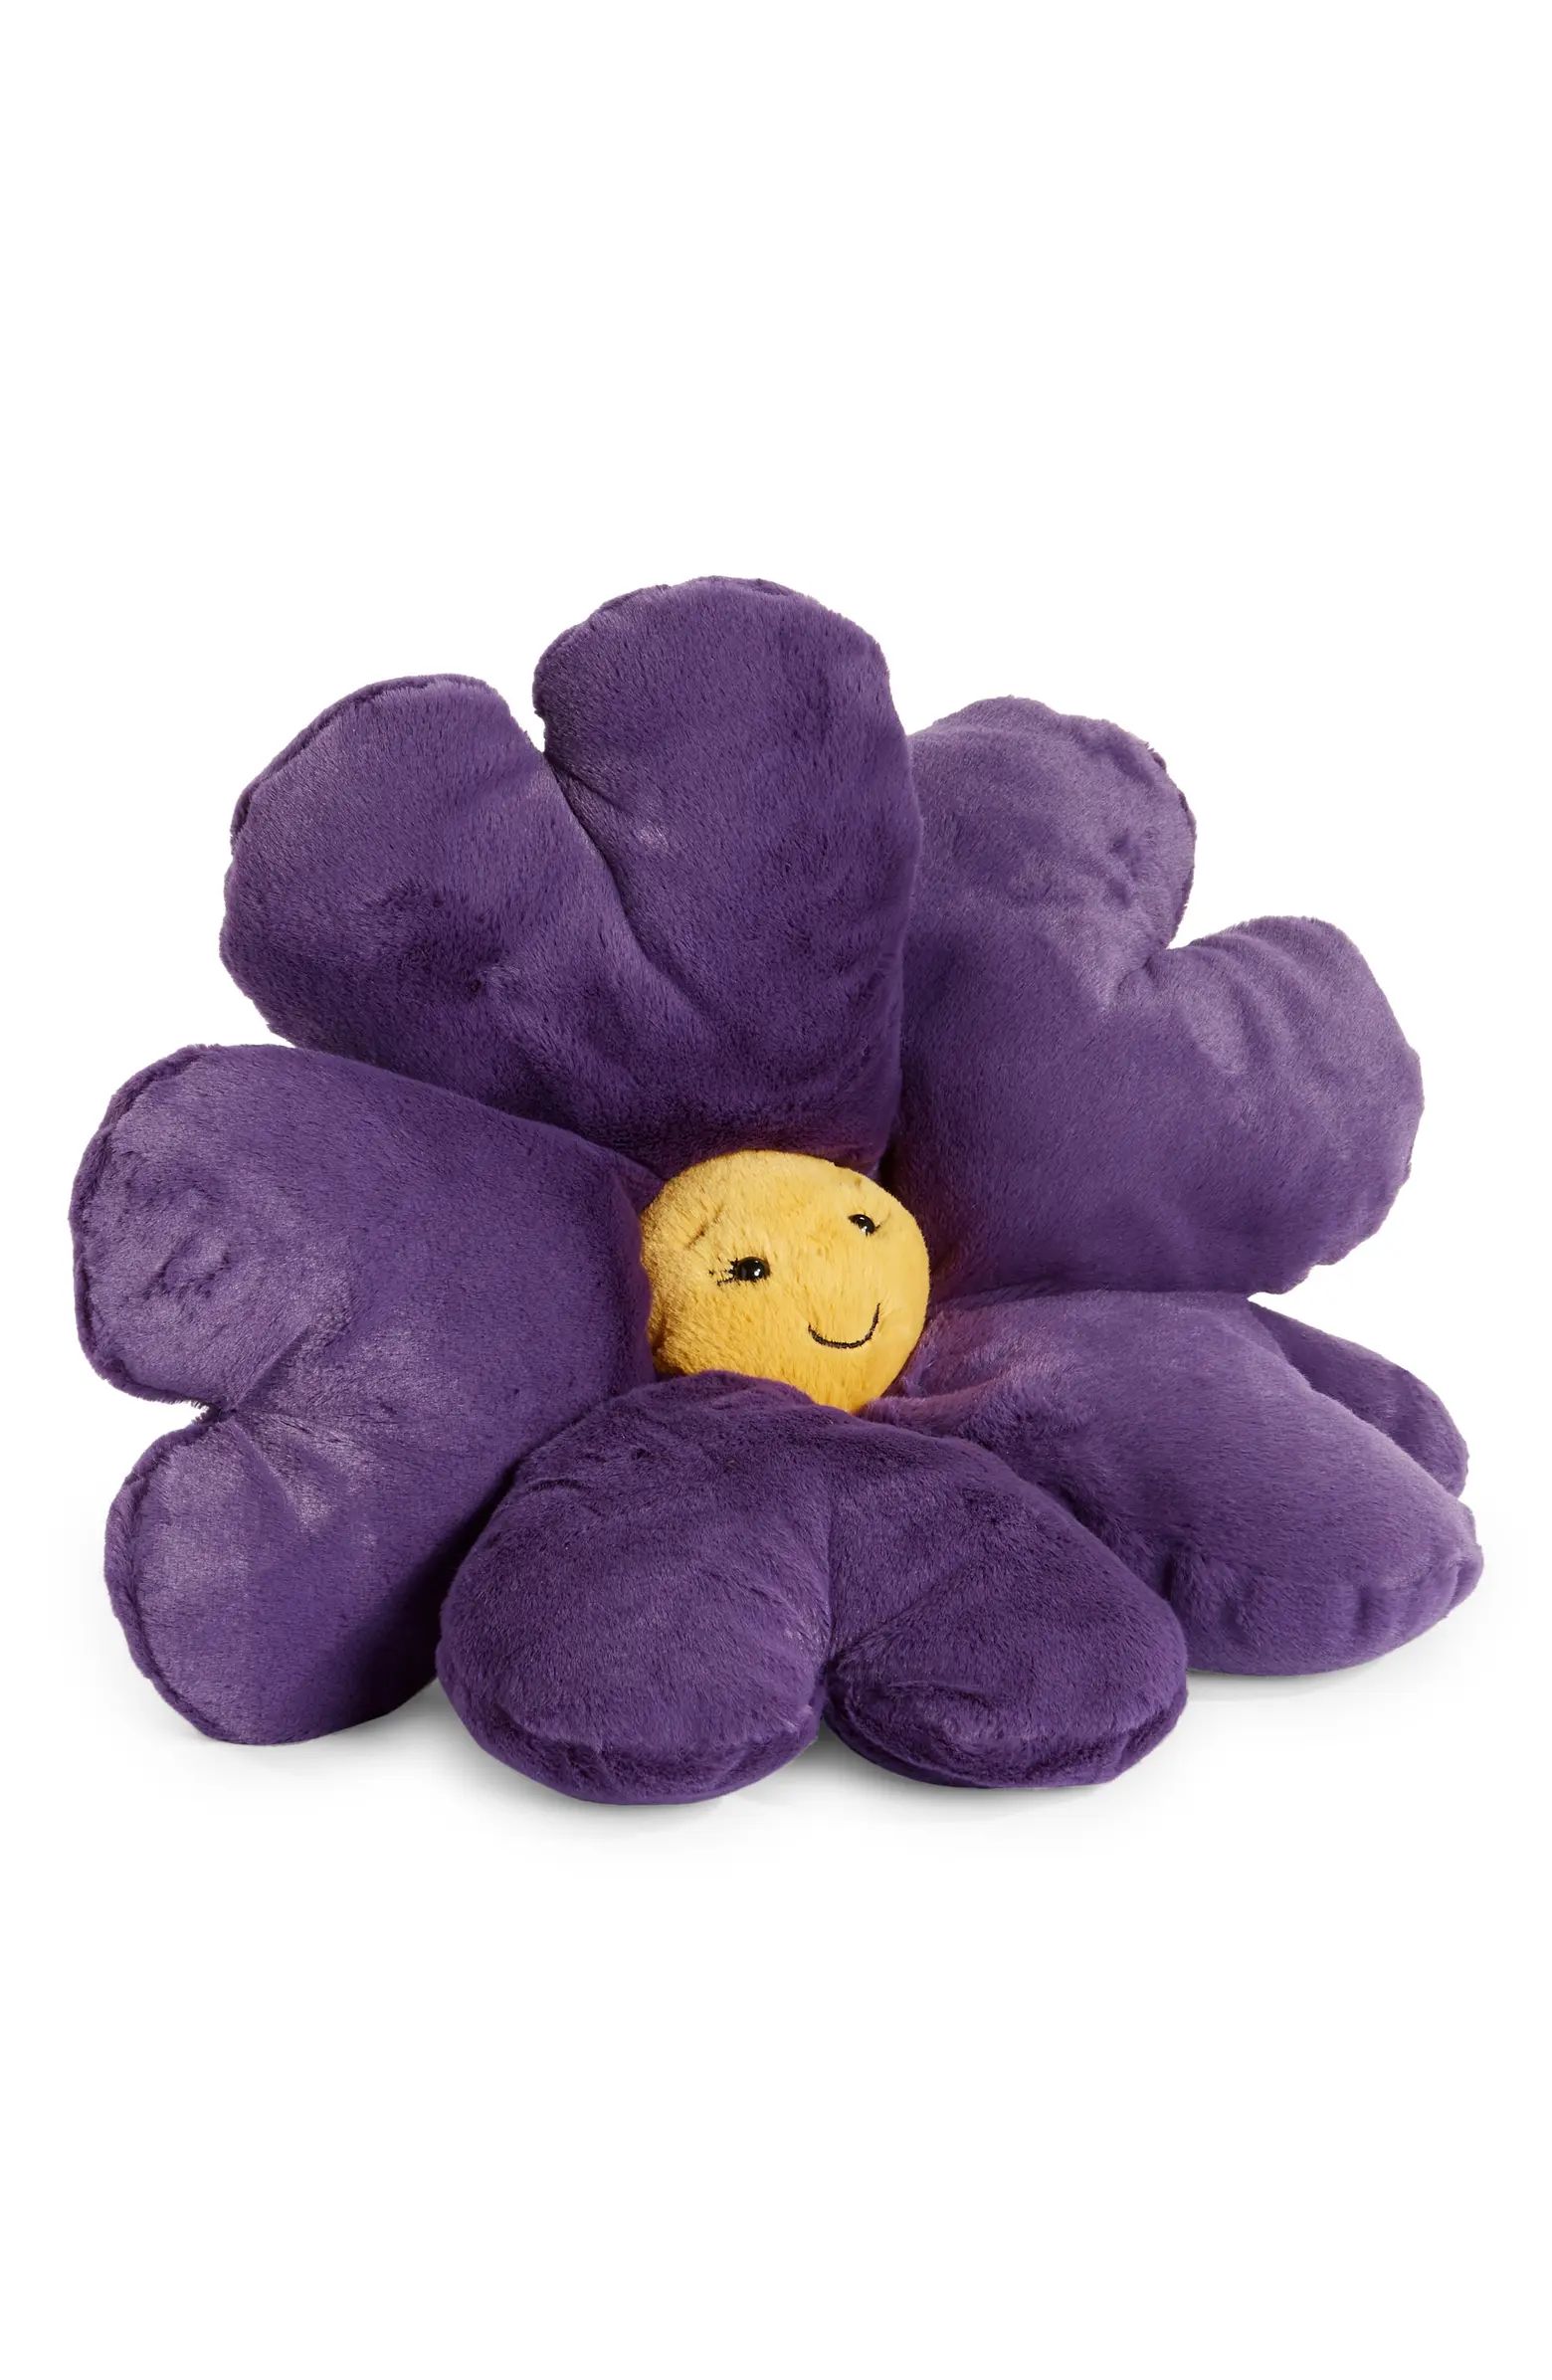 Jellycat Fabulous Fleury Pansy Plush Toy | Nordstrom | Nordstrom